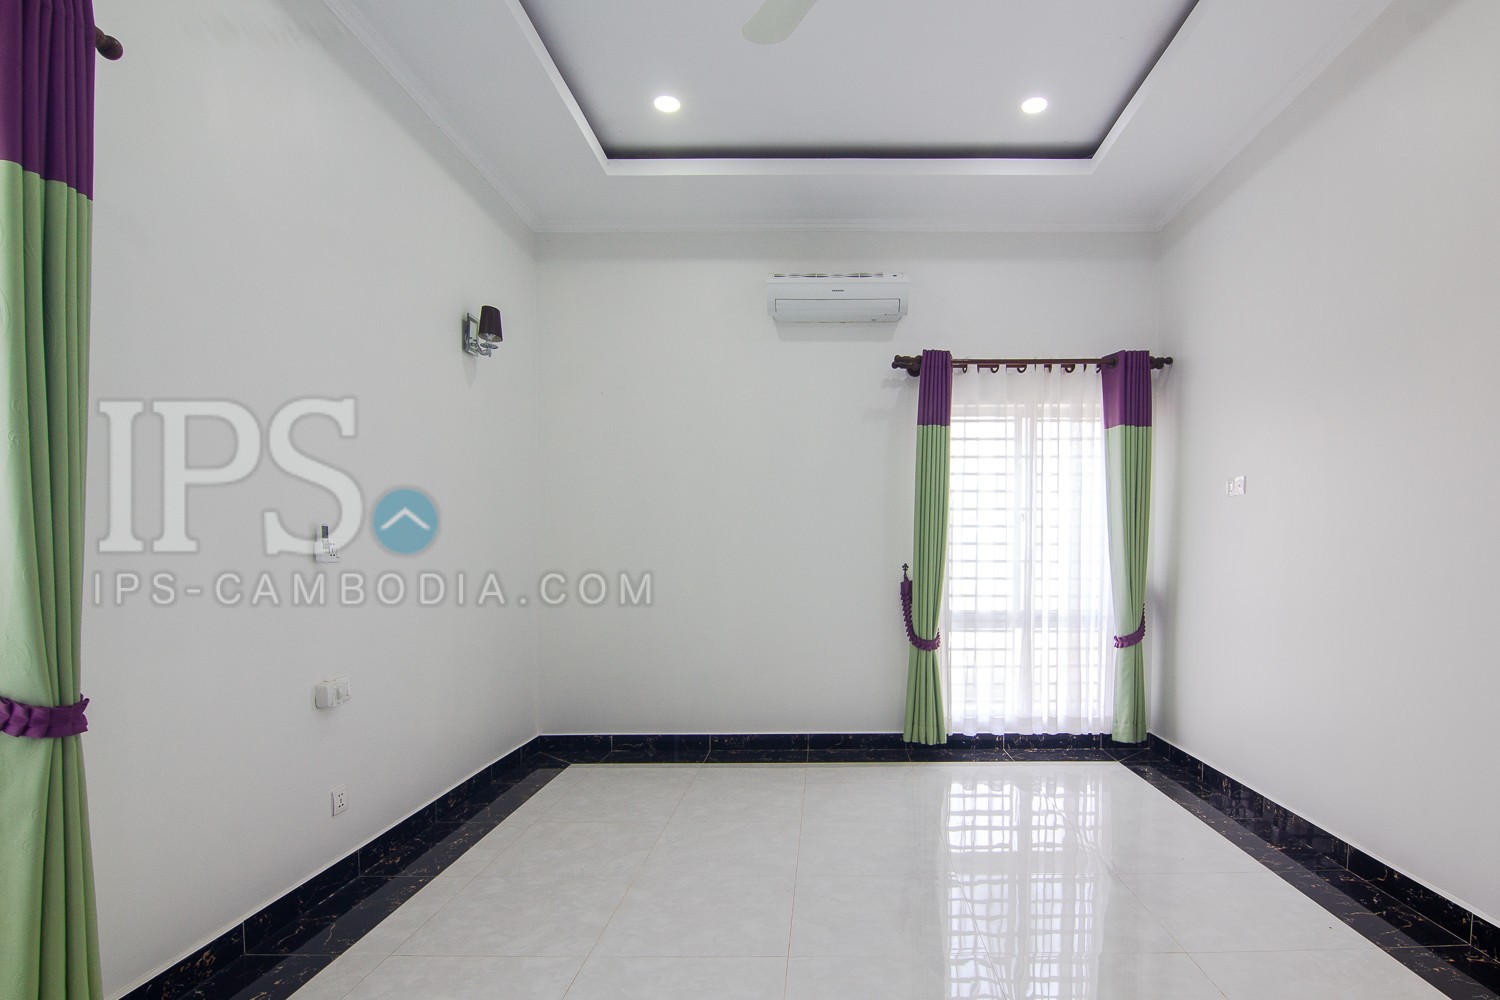 3 Bedroom House For Rent - Svay Thom, Siem Reap